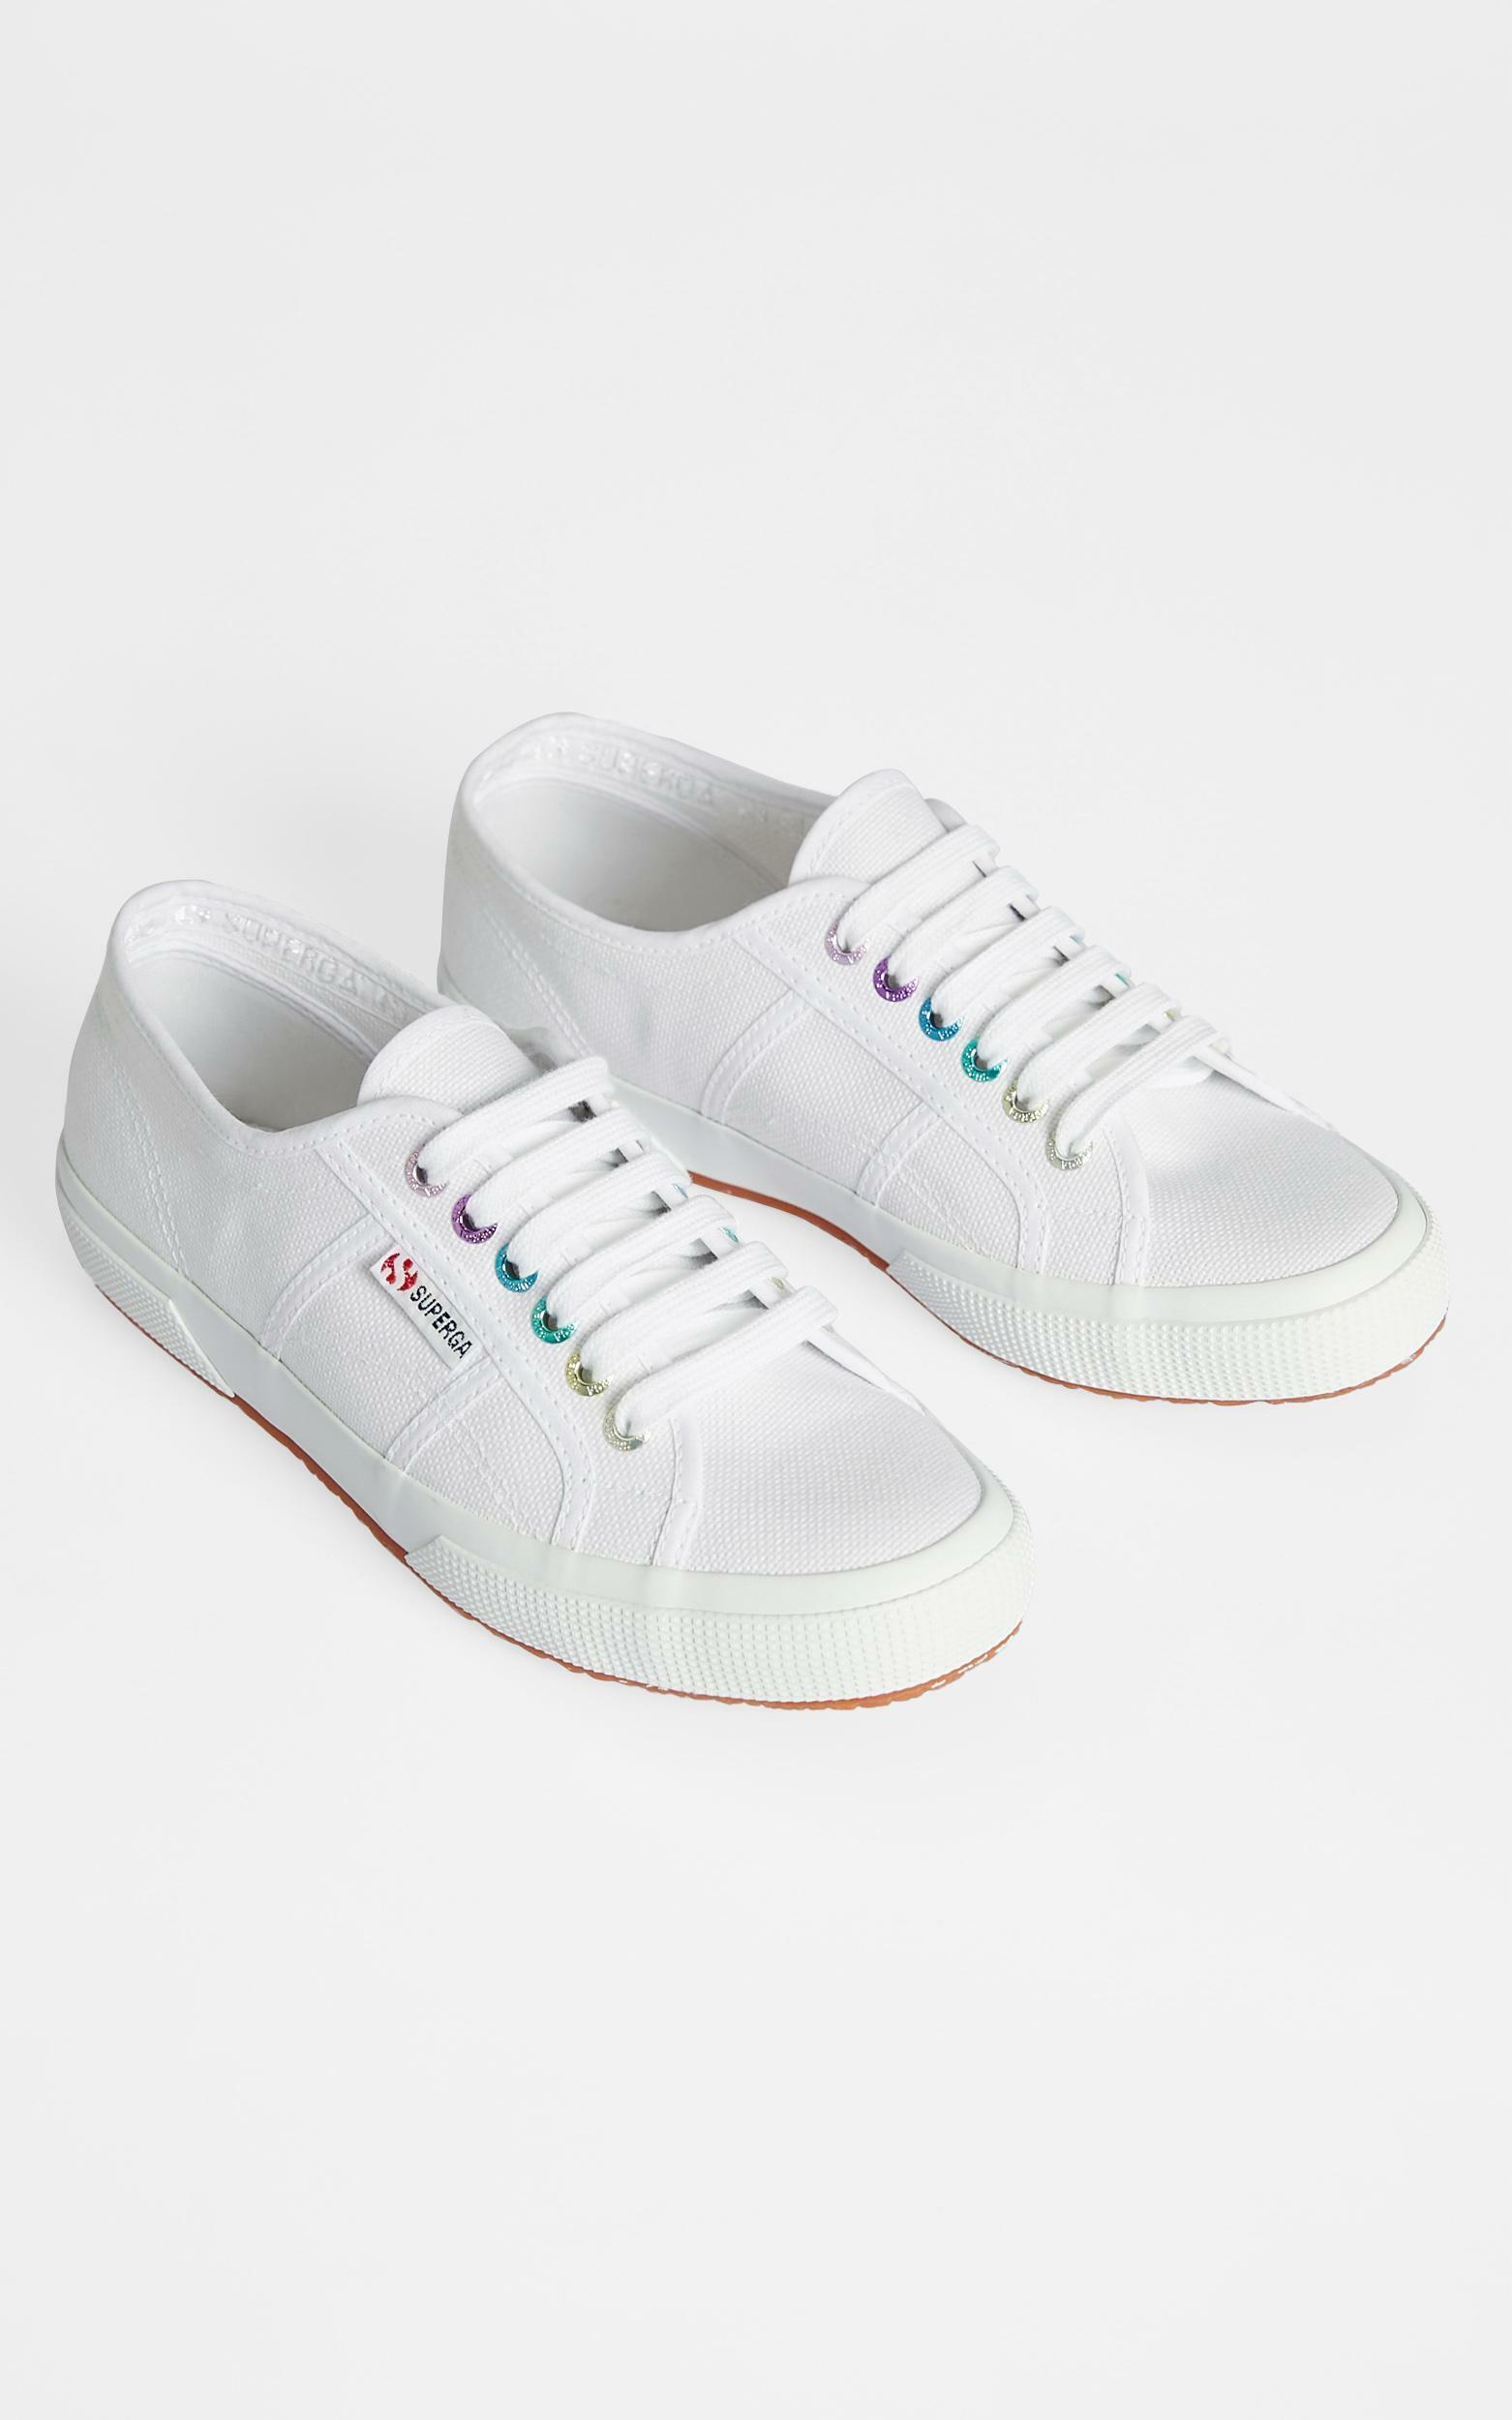 Superga - 2750 Colourful Eyelets Sneakers in A9T White - 05, WHT1, hi-res image number null